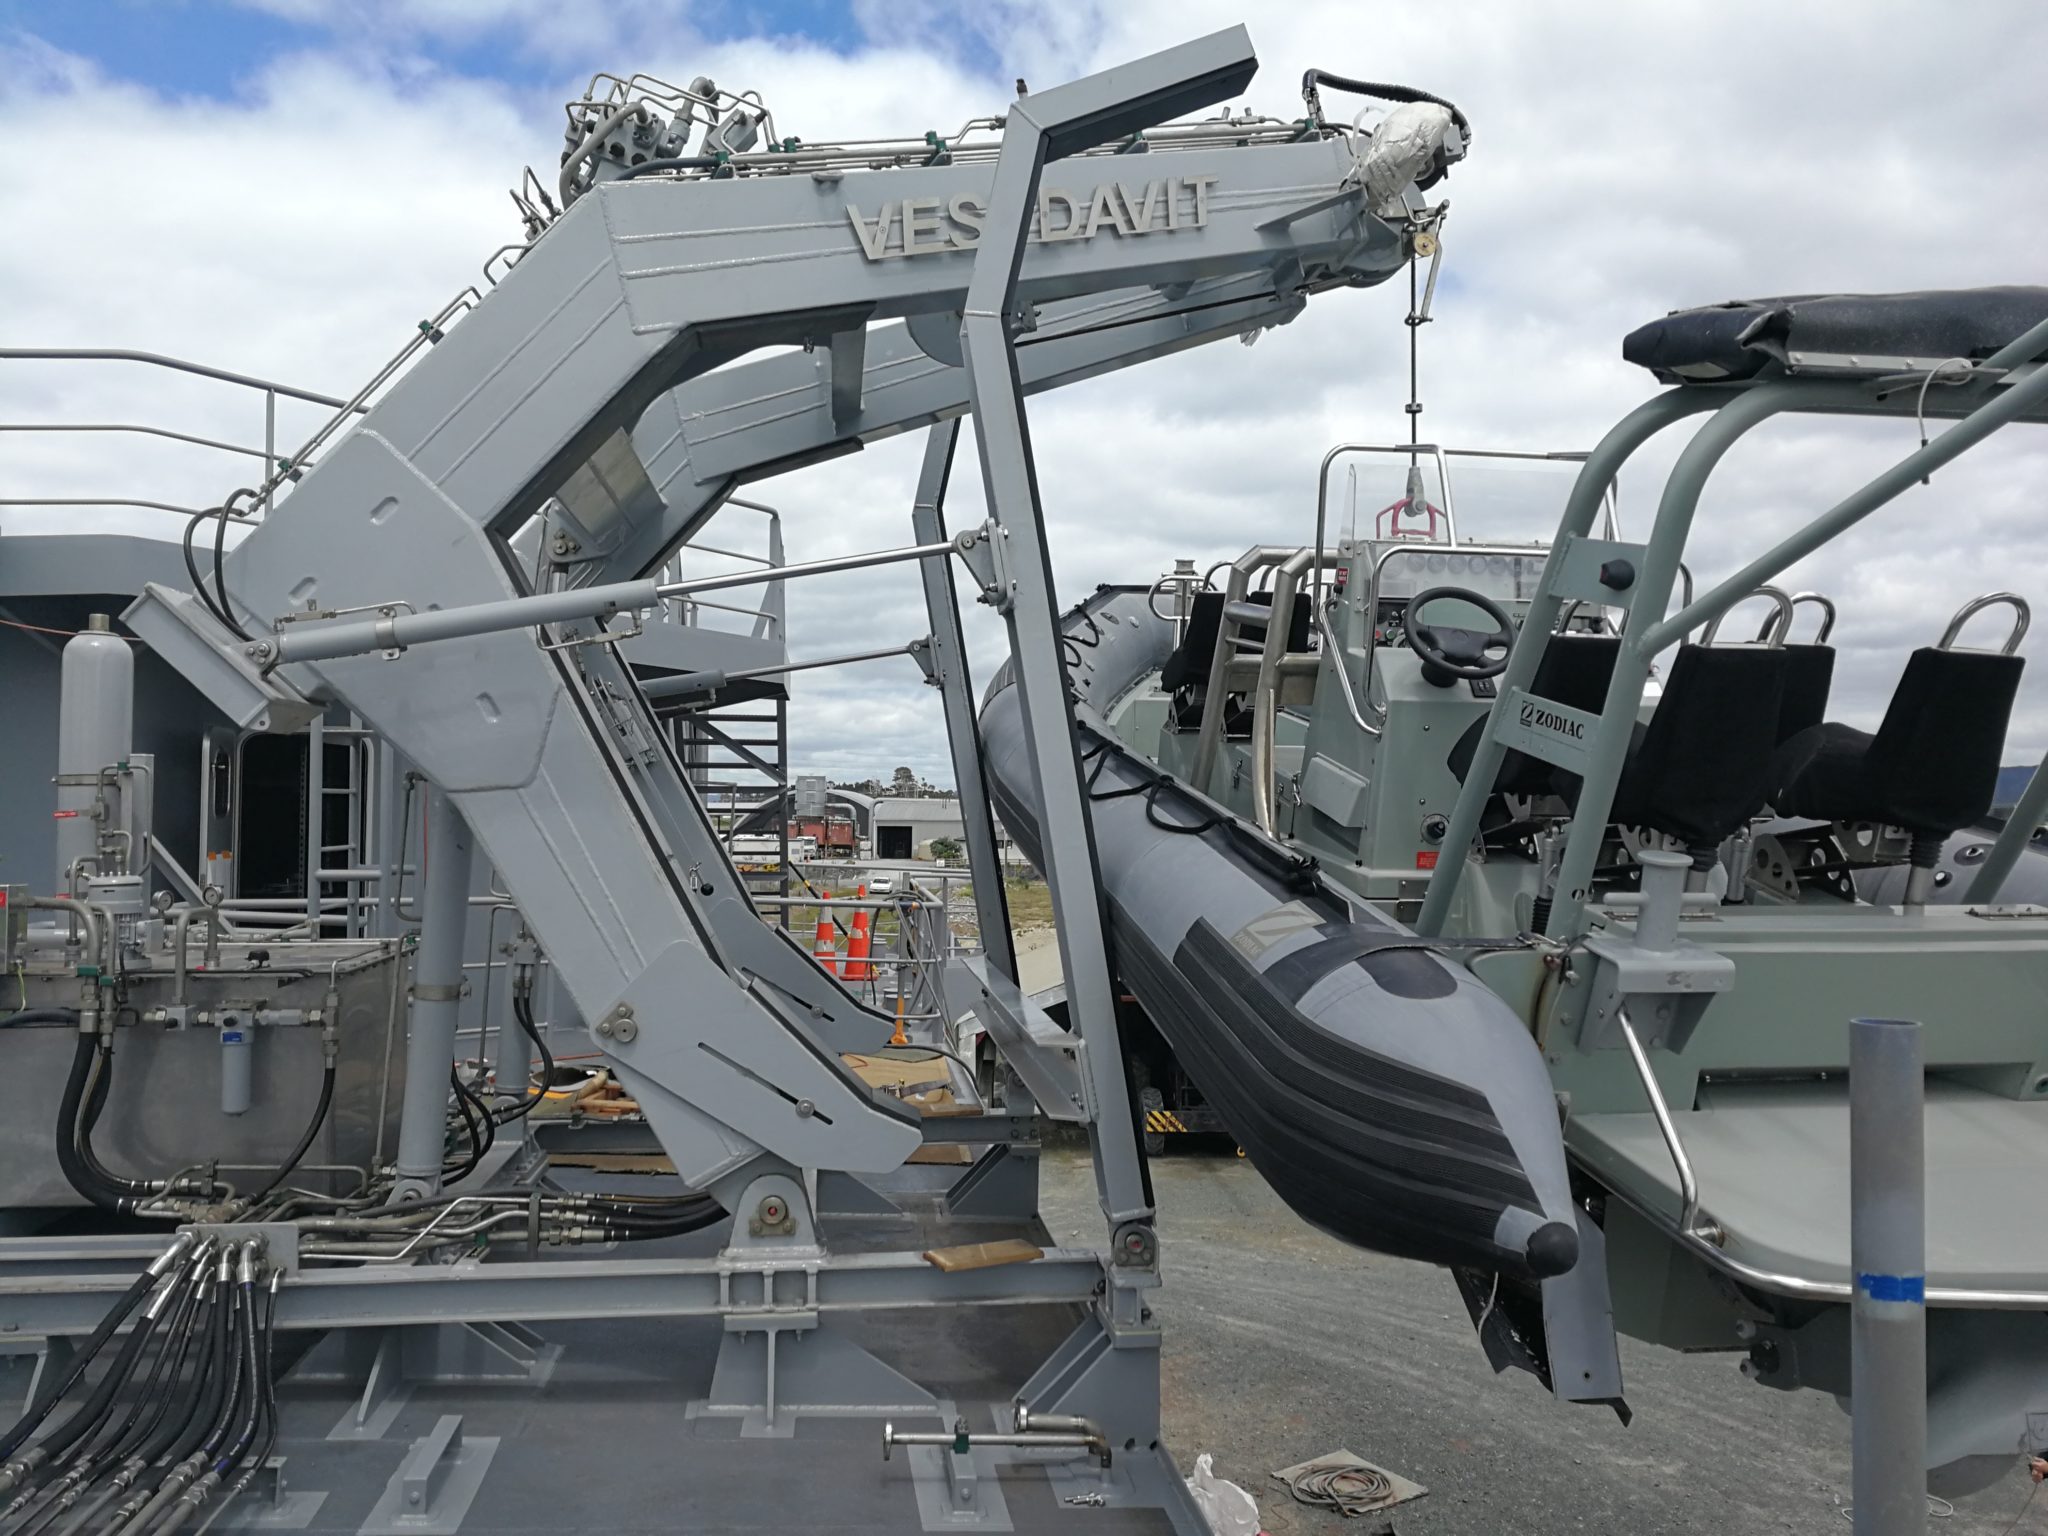 Antelope Engineering are proud to announce our recent role as partner with Vestdavit bringing boat handling technology to The Royal New Zealand Navy.